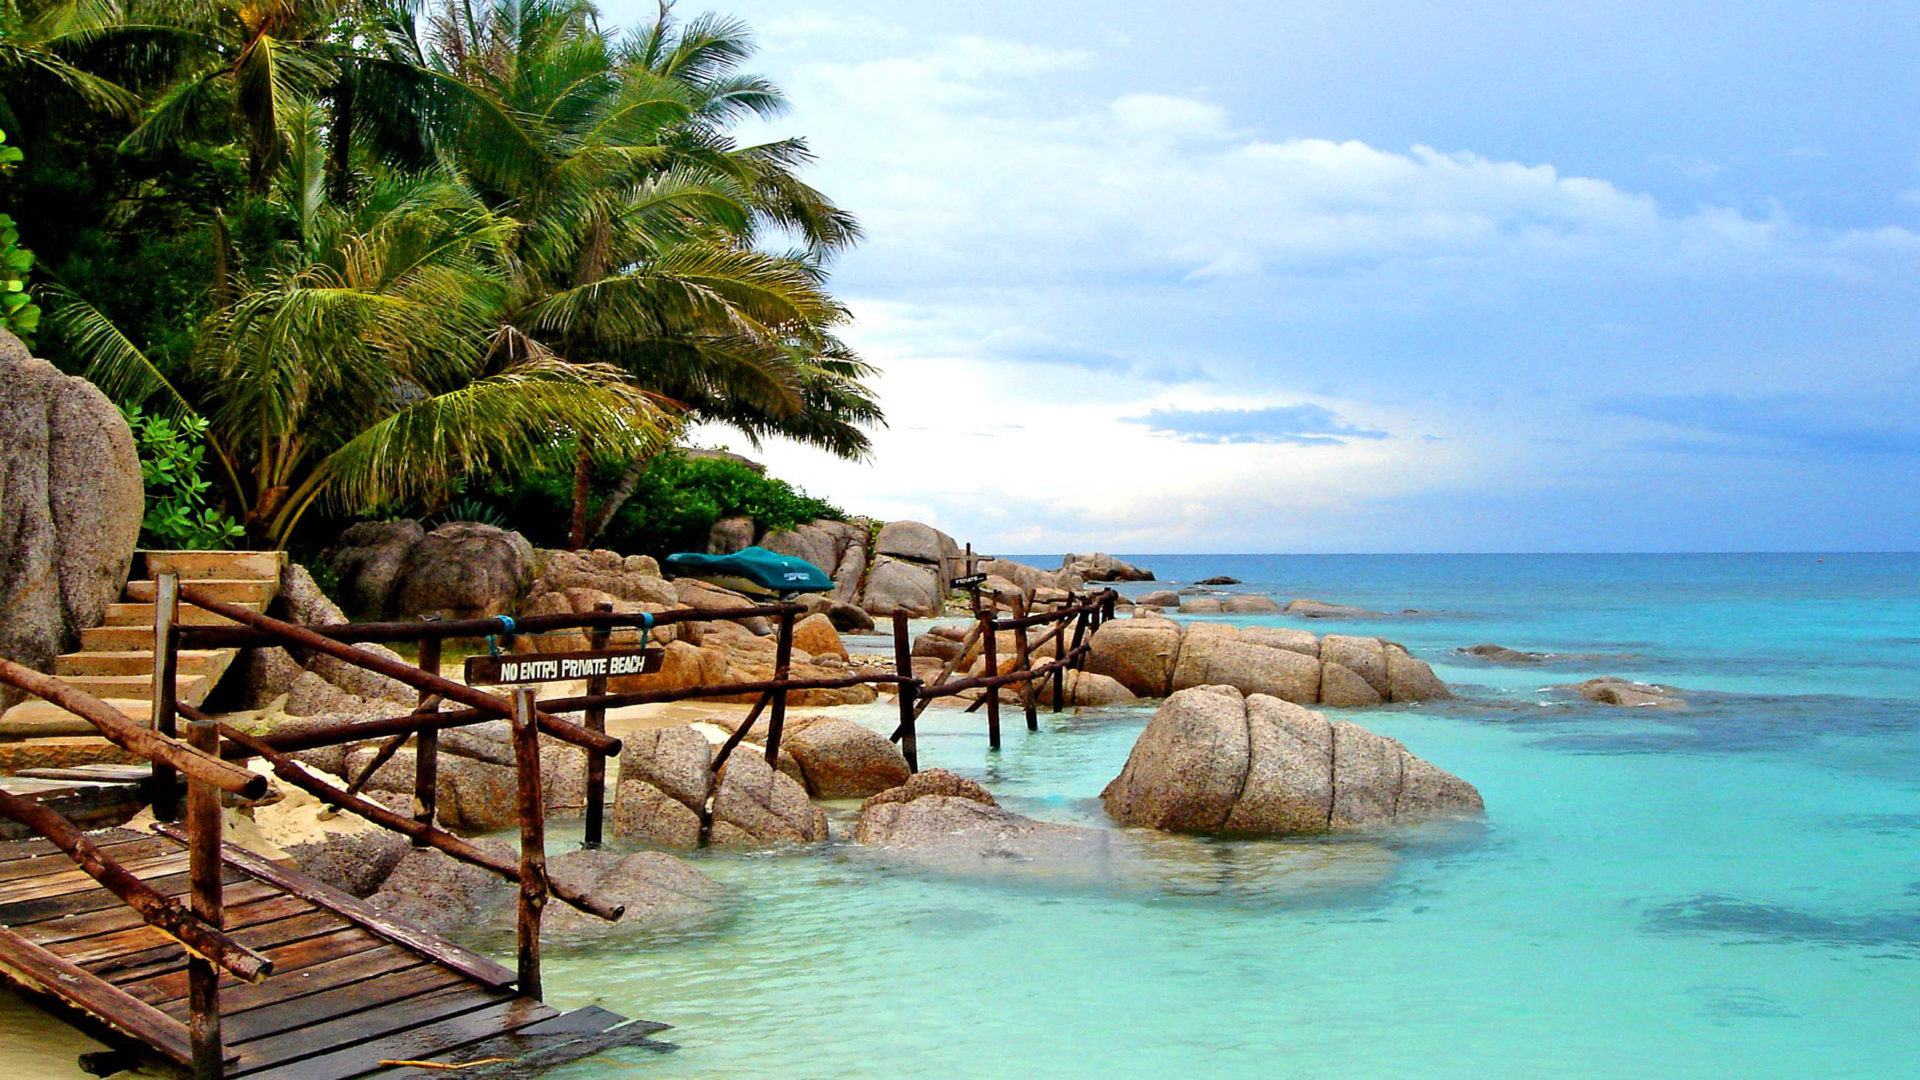 Private beach, Koh Tao island, Secluded paradise, Thailand travels, 1920x1080 Full HD Desktop